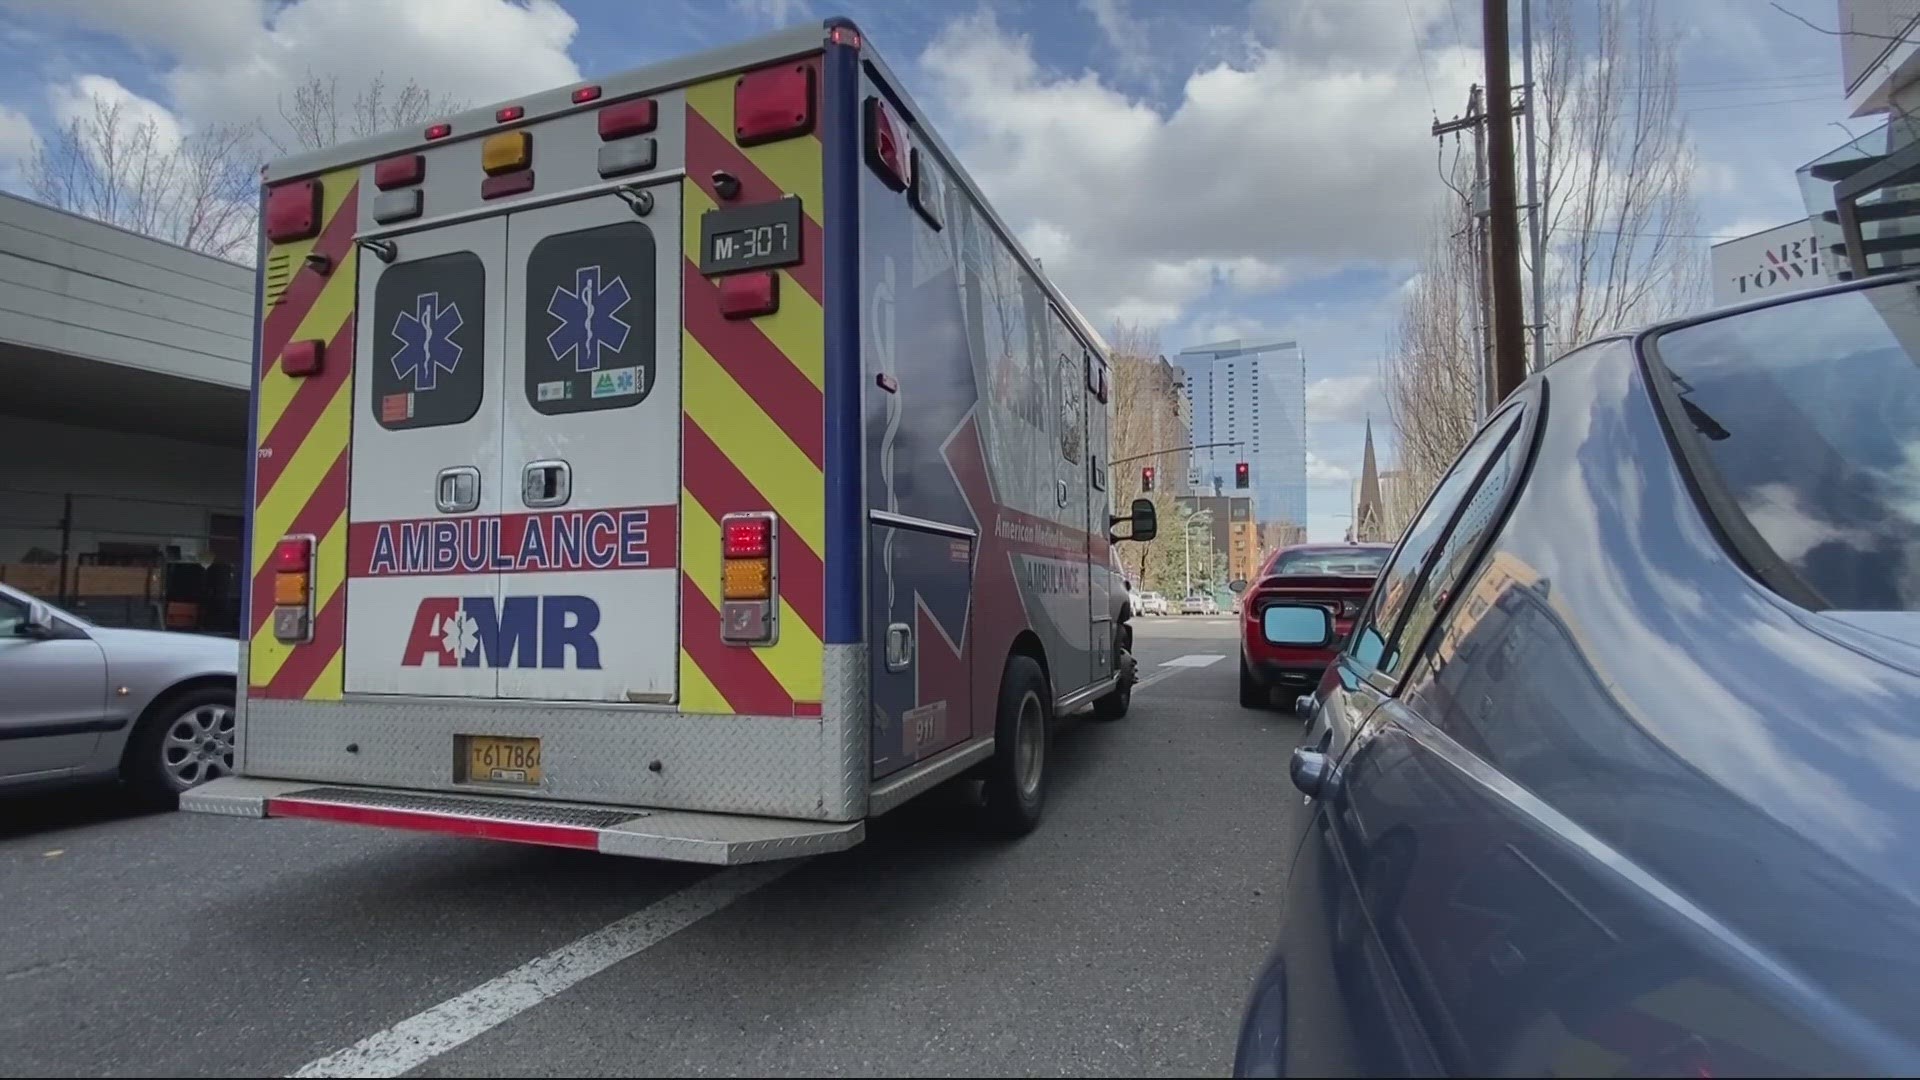 The fine was for late ambulance responses during the month of August, escalating a standoff over poor 911 response times by the county's ambulance provider.